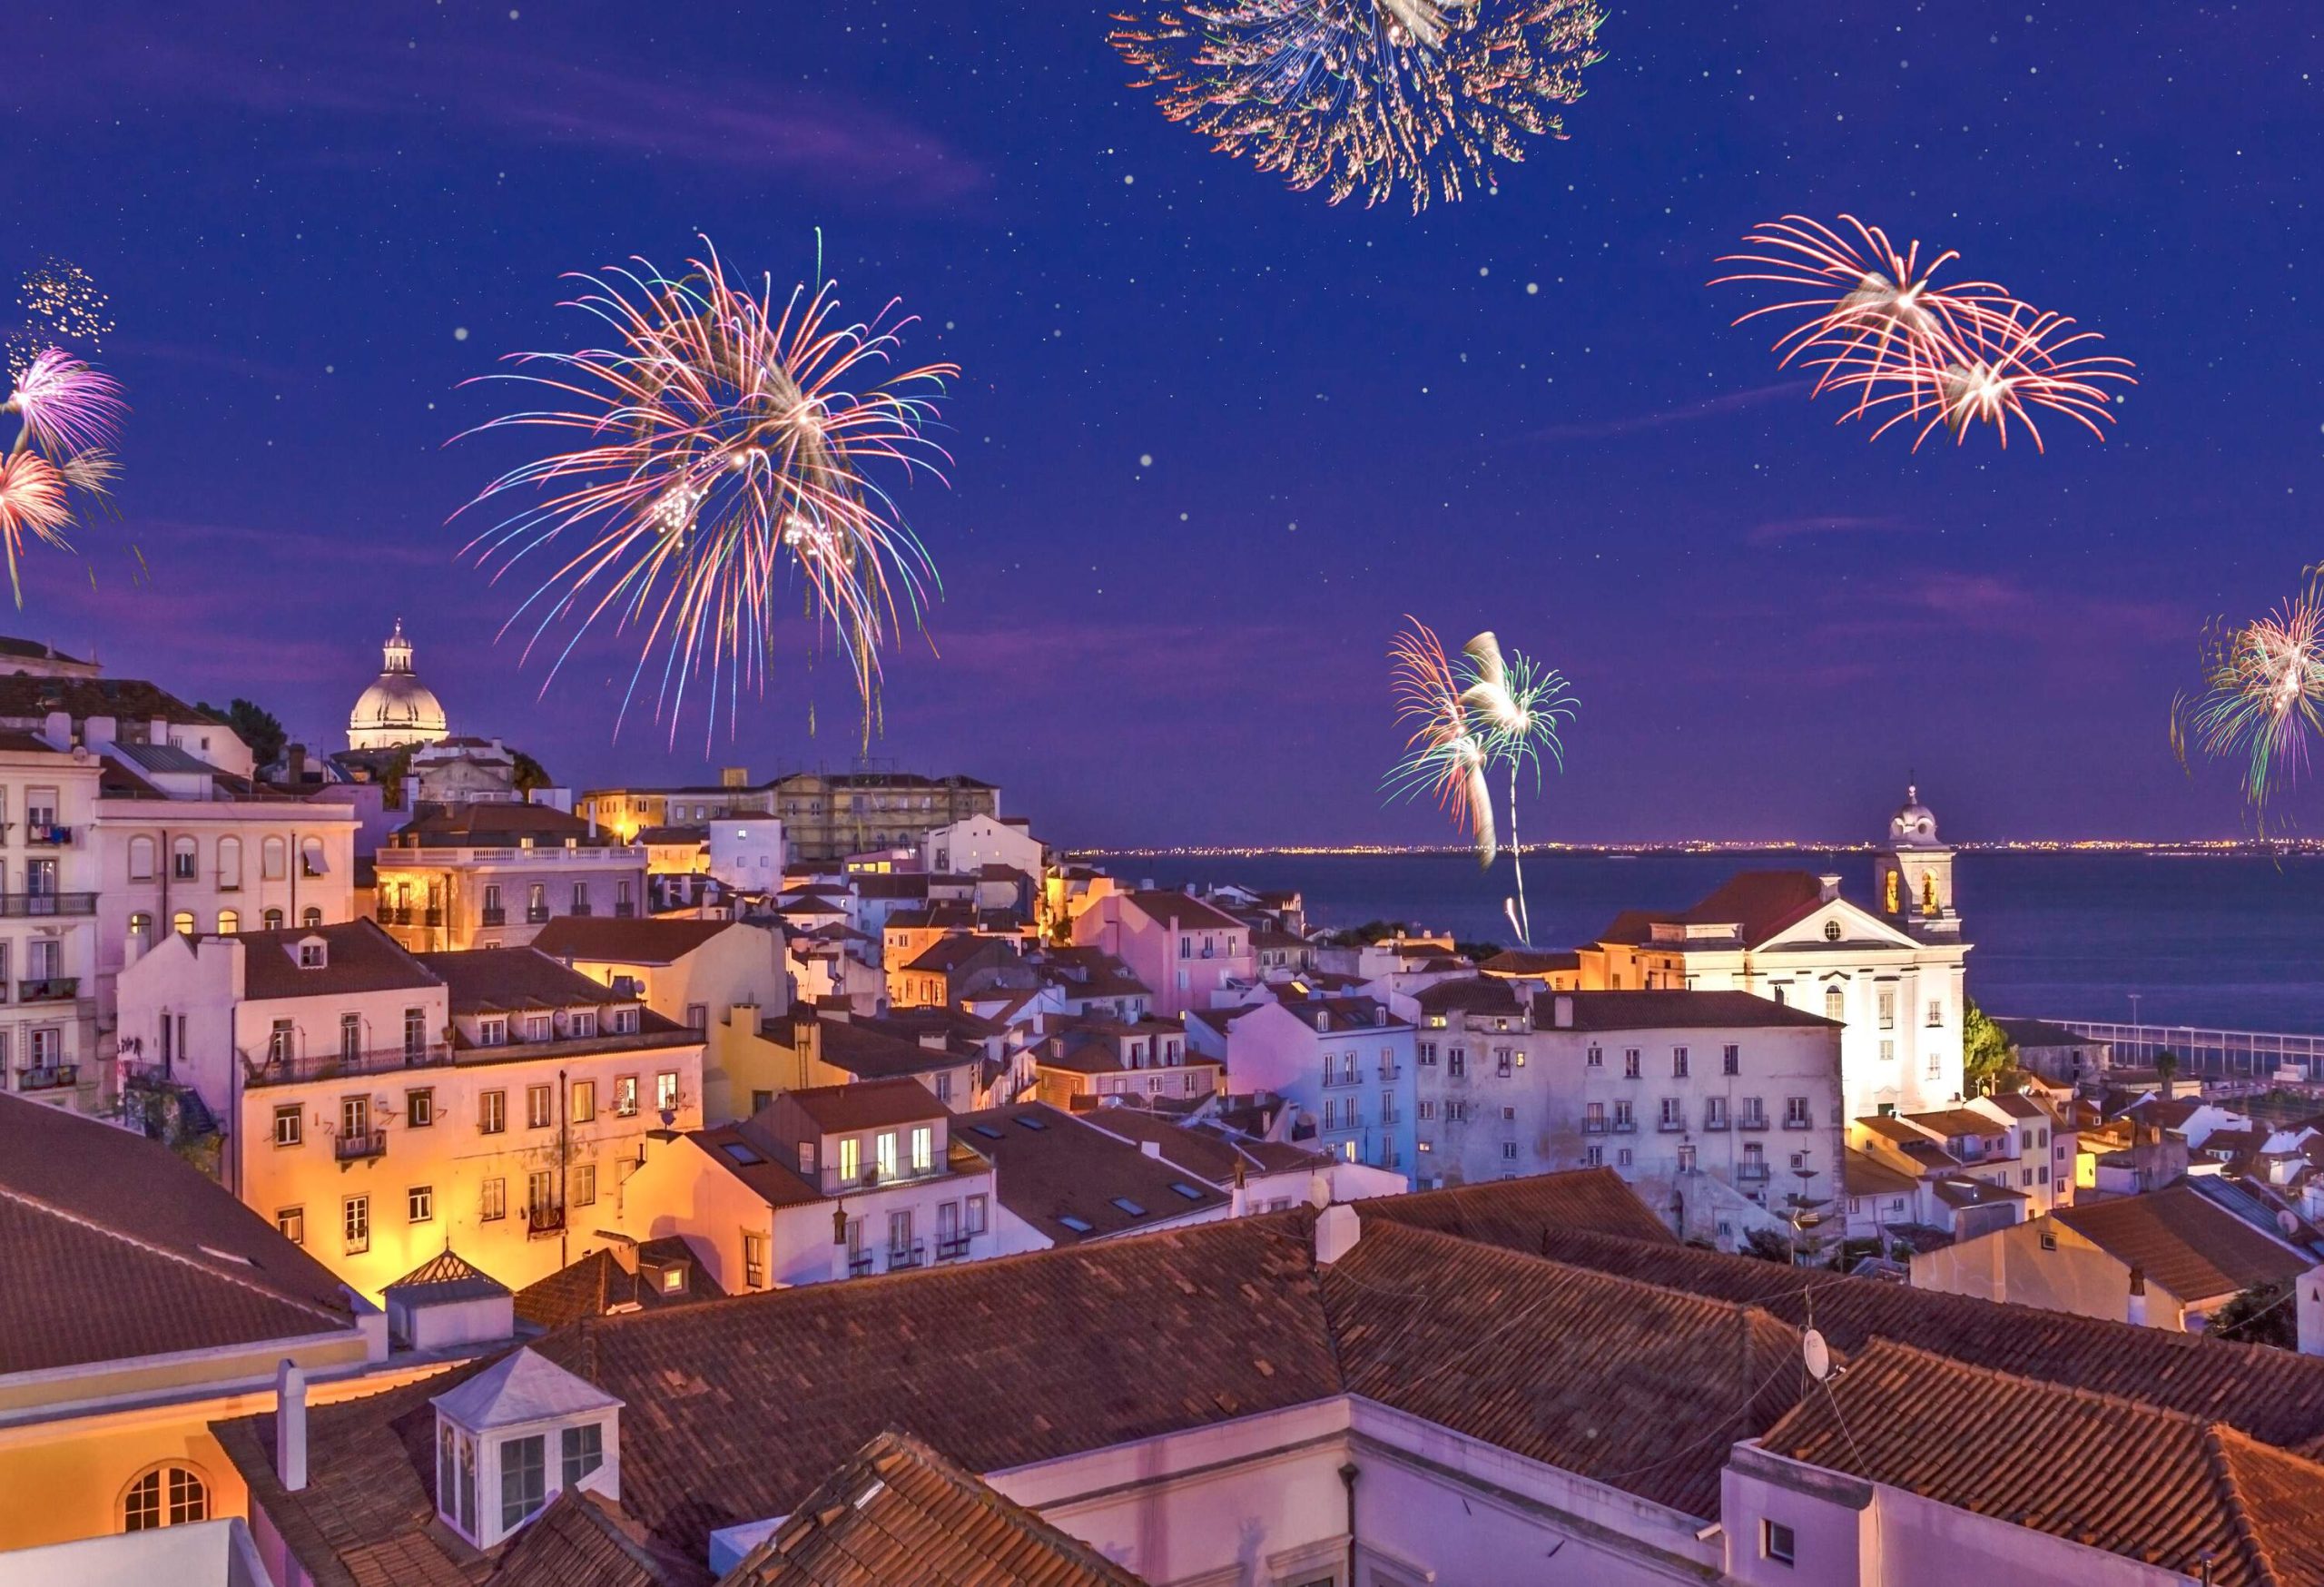 Assembly of fireworks above the district Alfama at new years eve in the portuguese capital.